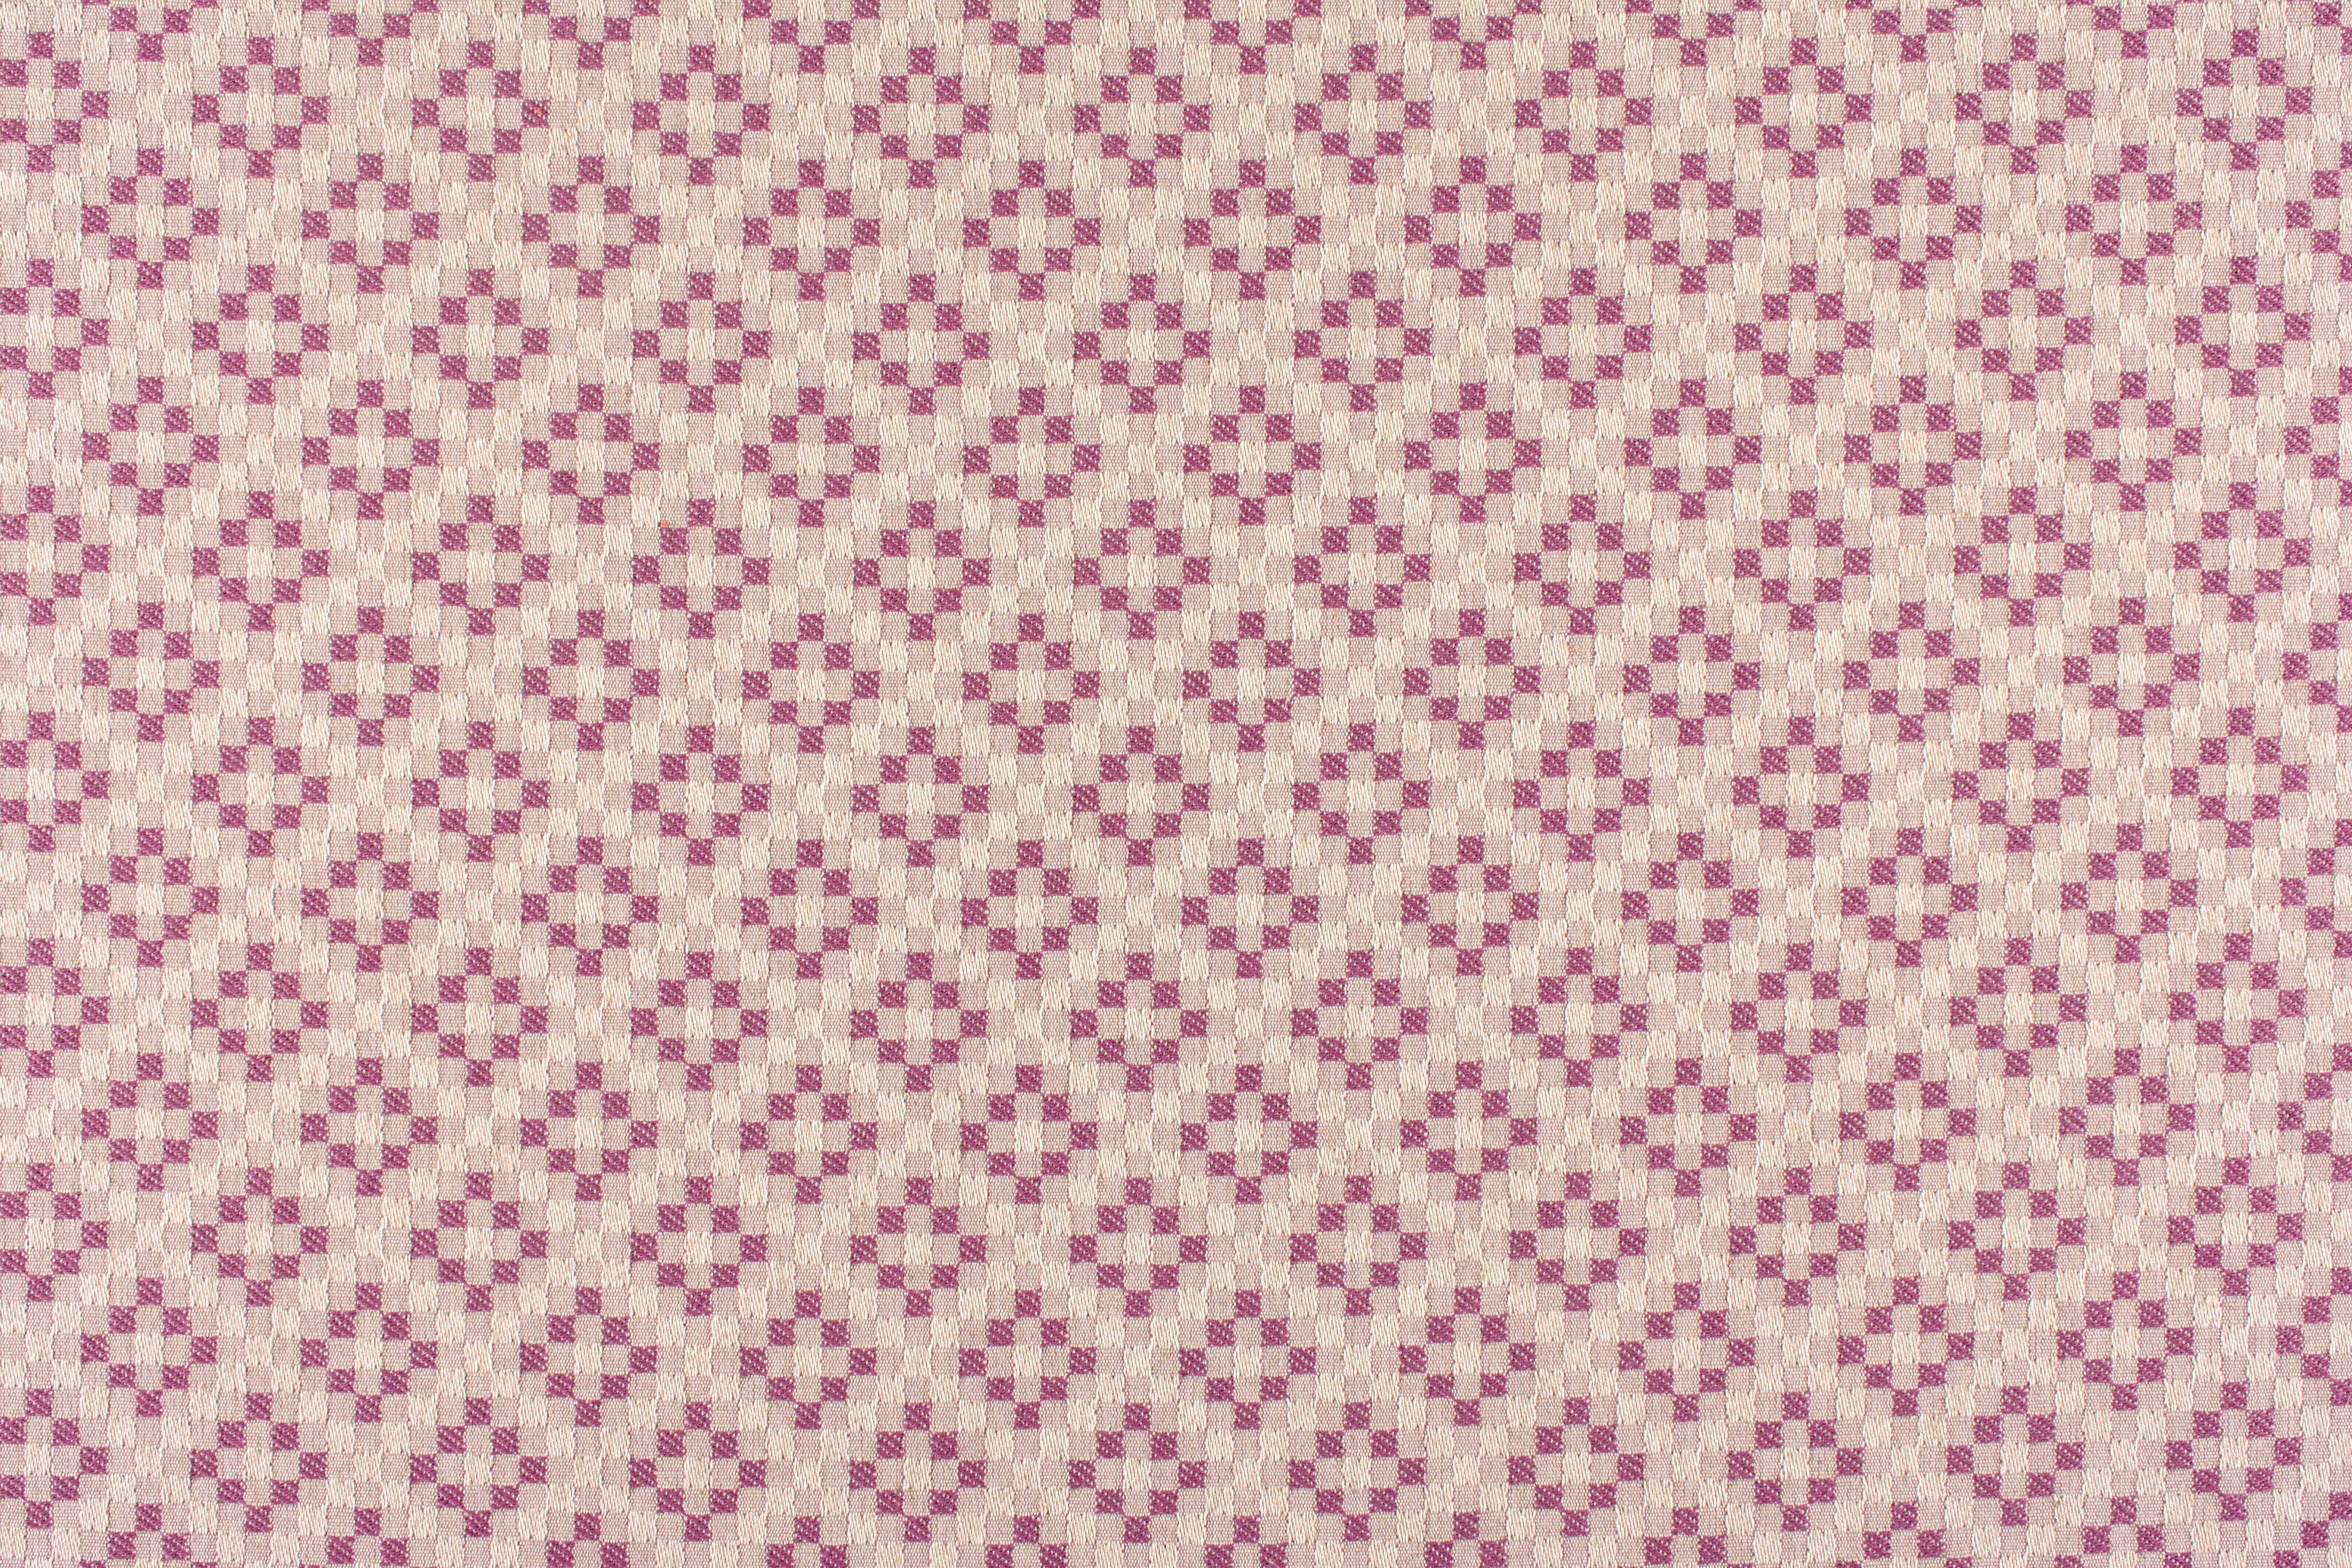 Lorcan fabric in plum color - pattern number VW 0002FC01 - by Scalamandre in the Old World Weavers collection